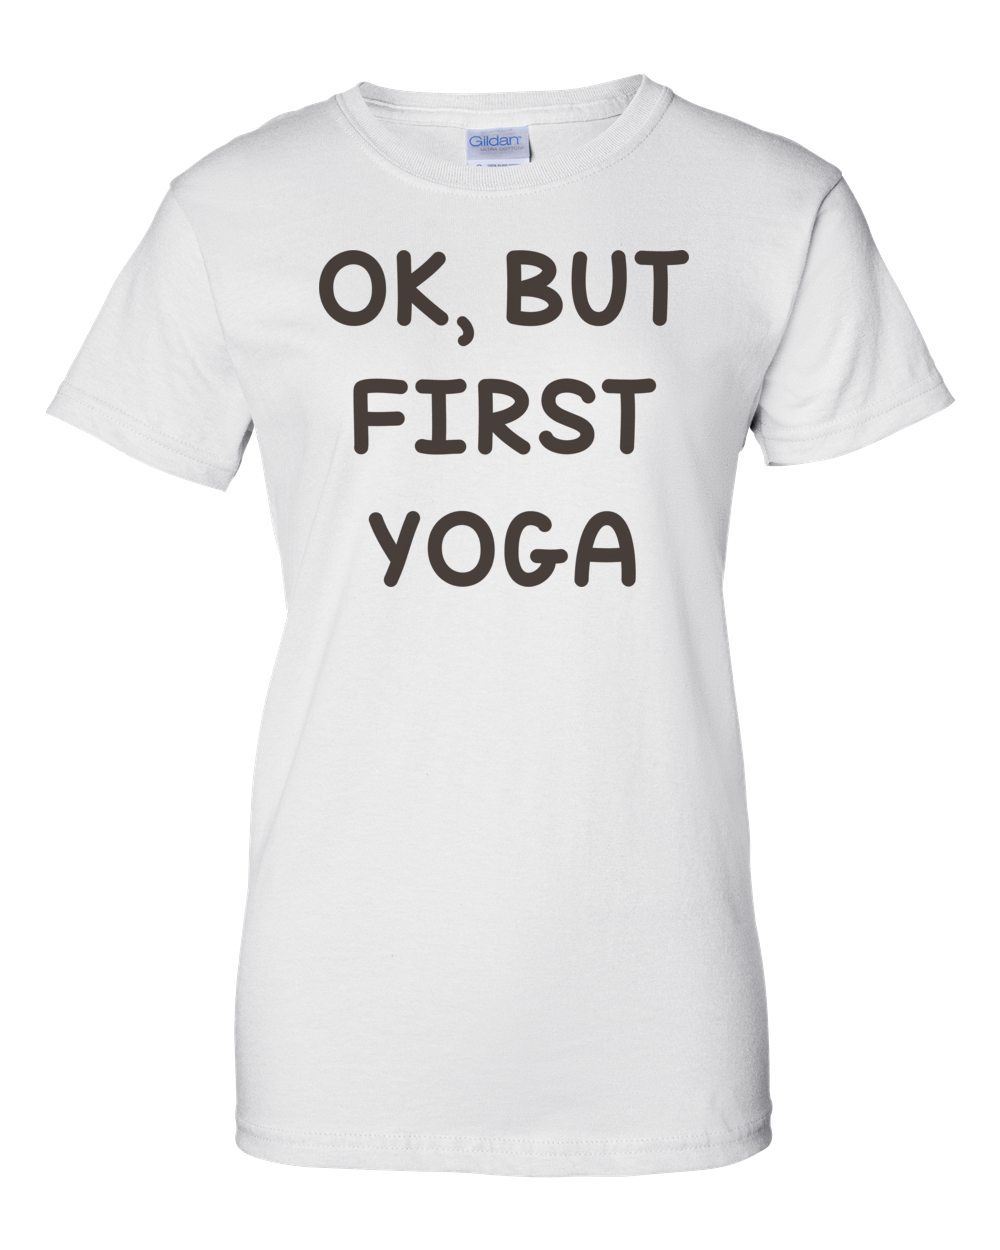 10 T-Shirts To Keep You Inspired This World Yoga Day